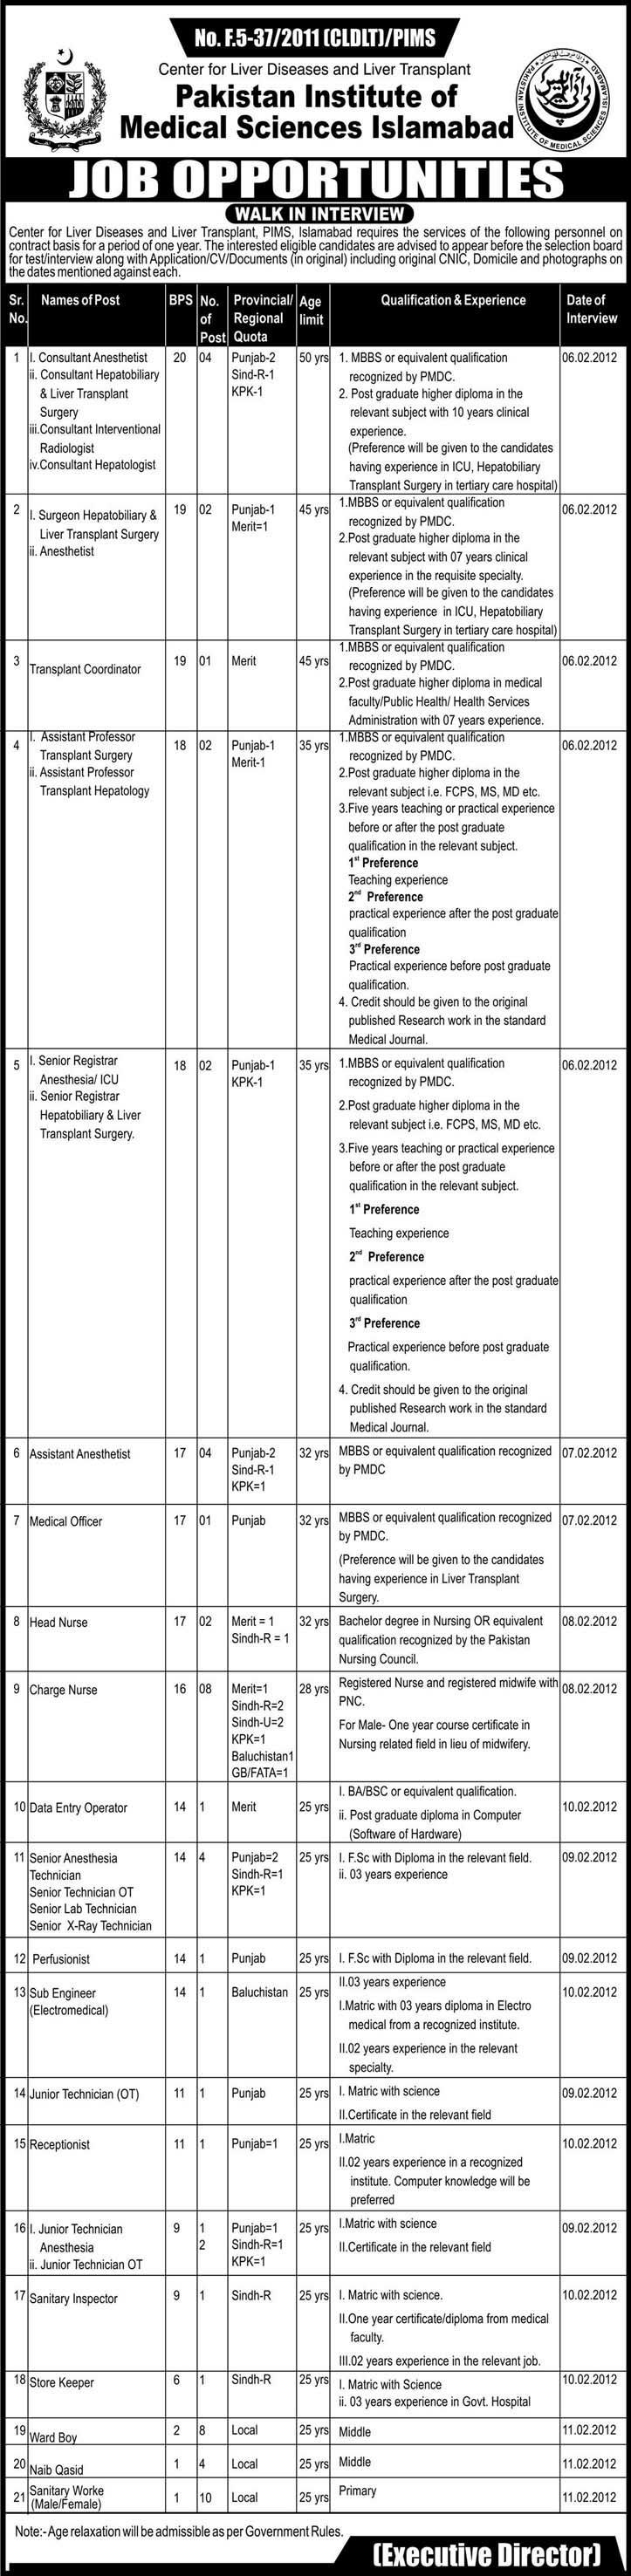 Pakistan Institute of Medical Sciences, Islamabad  Jobs Opportunity